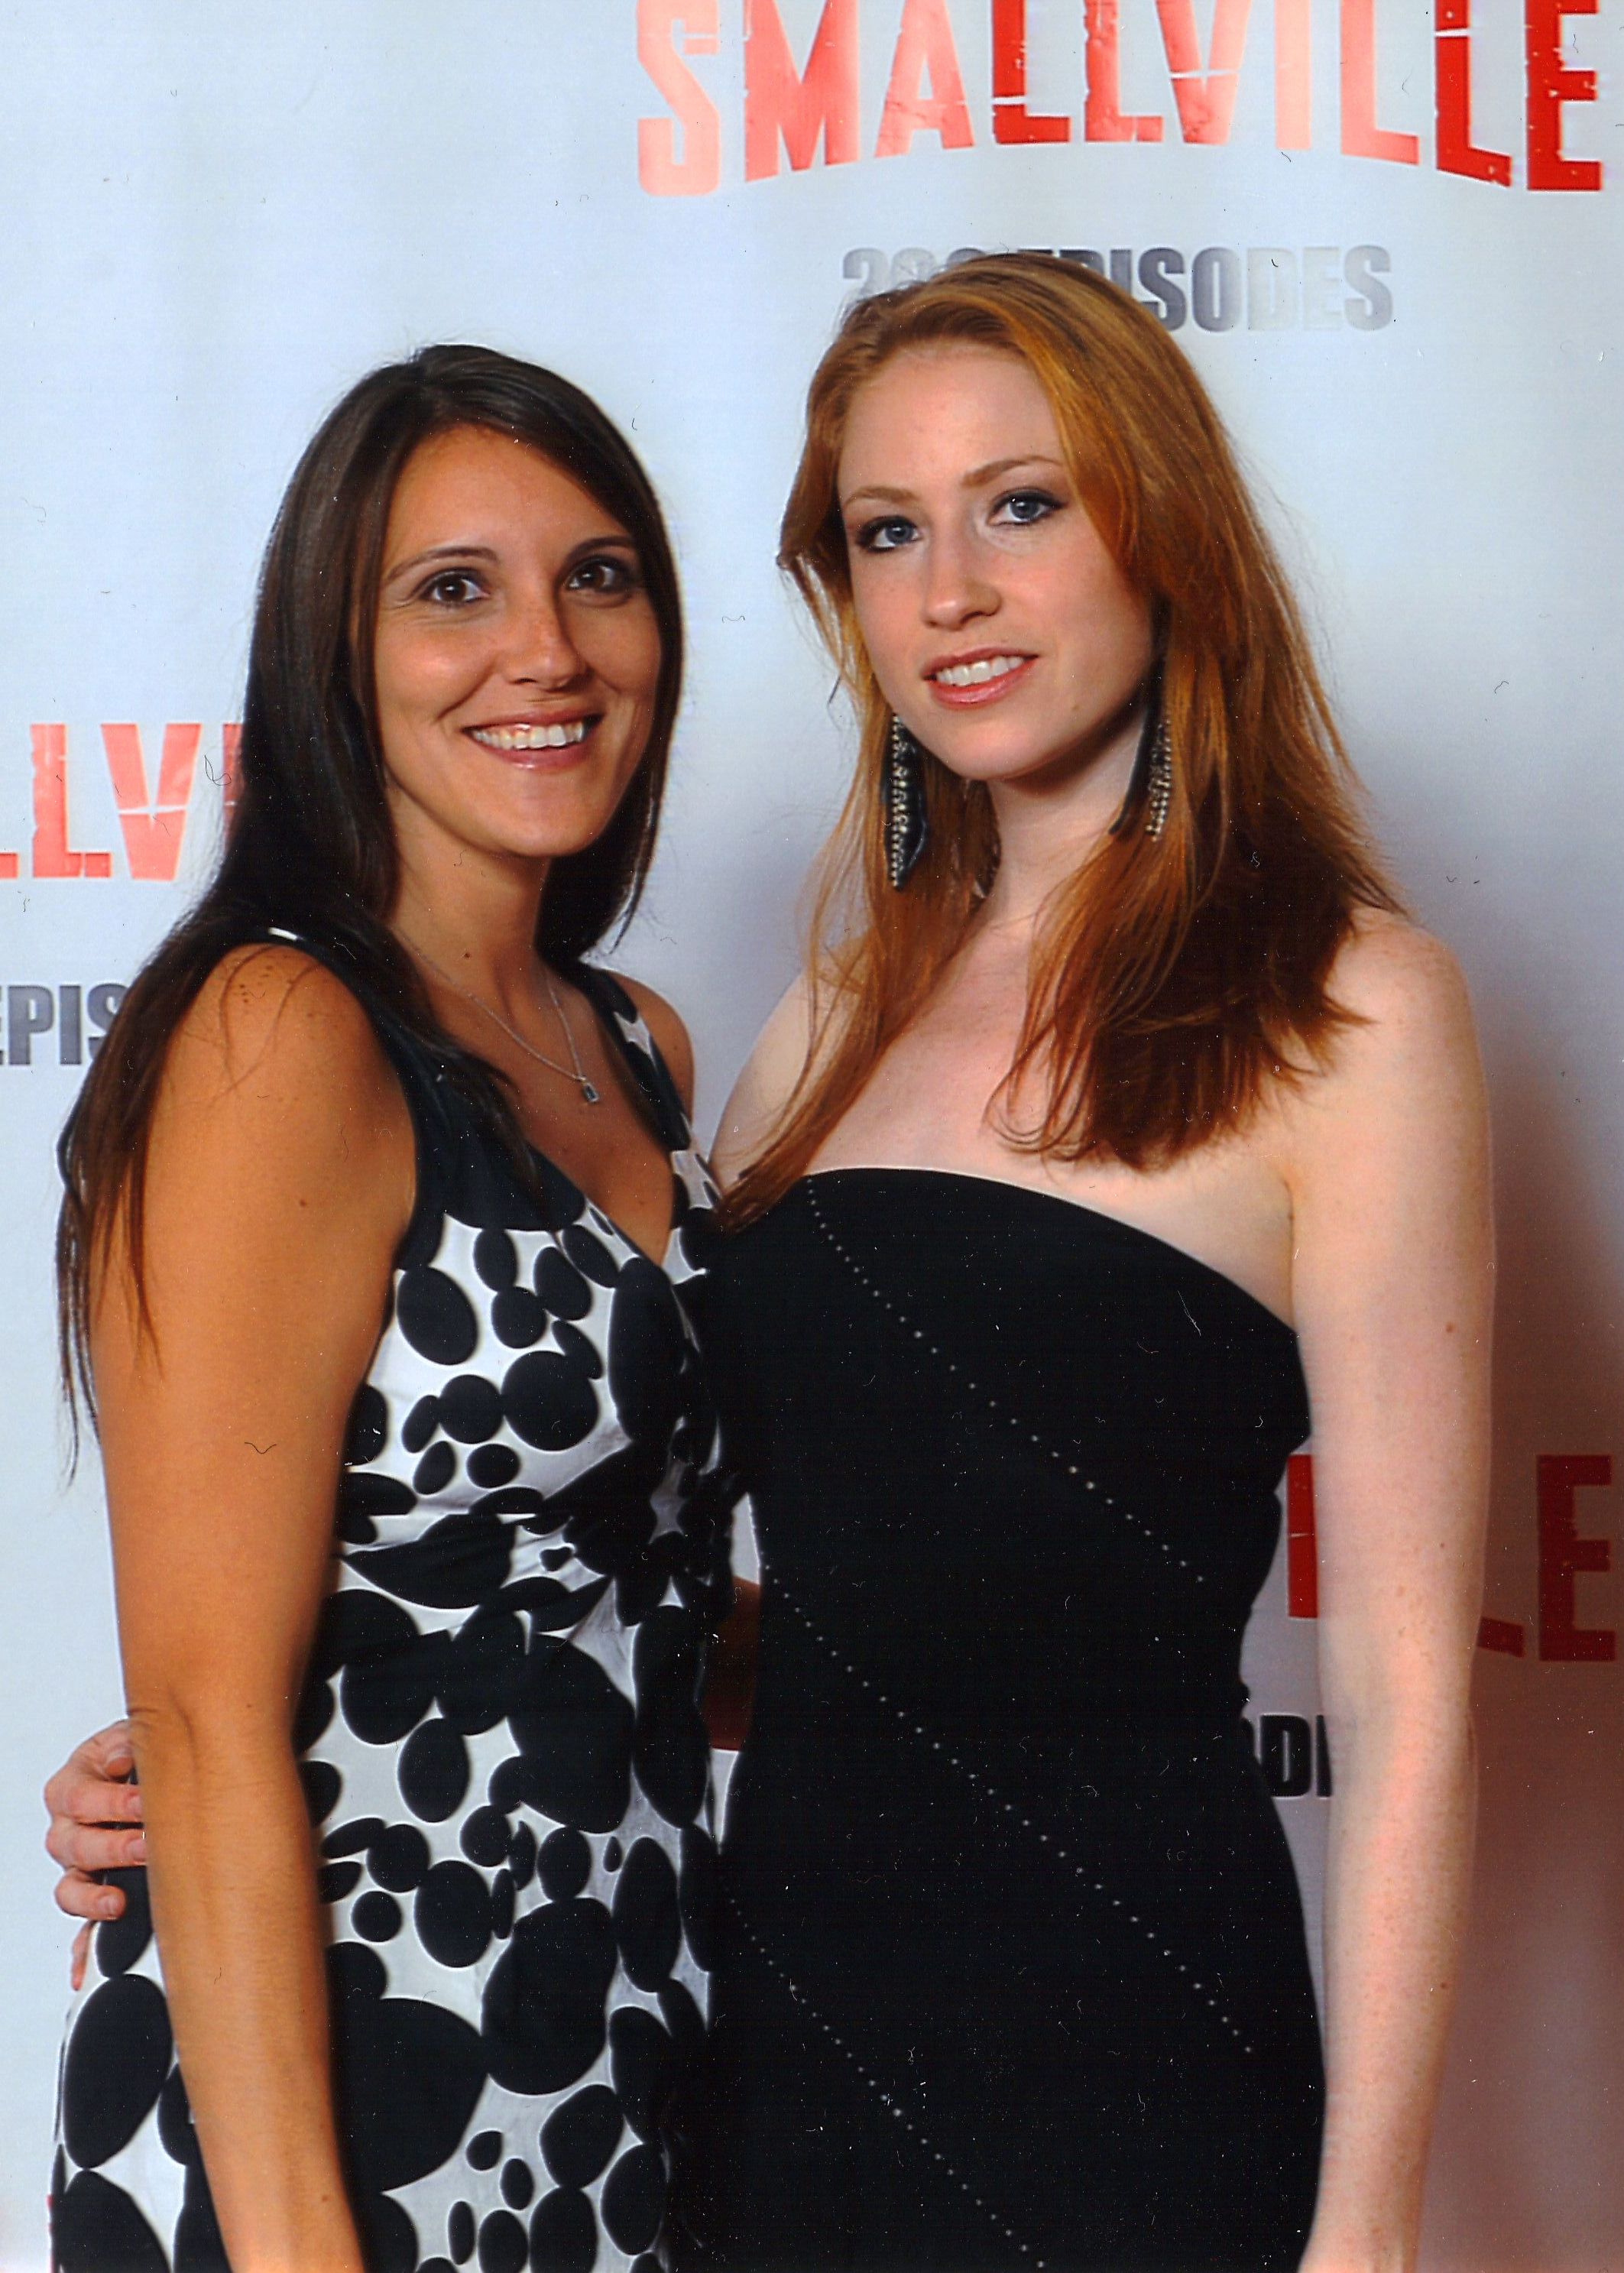 Holly Stevens, with actress Sarah Kelly, at the Smallville 200th Episode Party, Vancouver, British Columbia, Canada